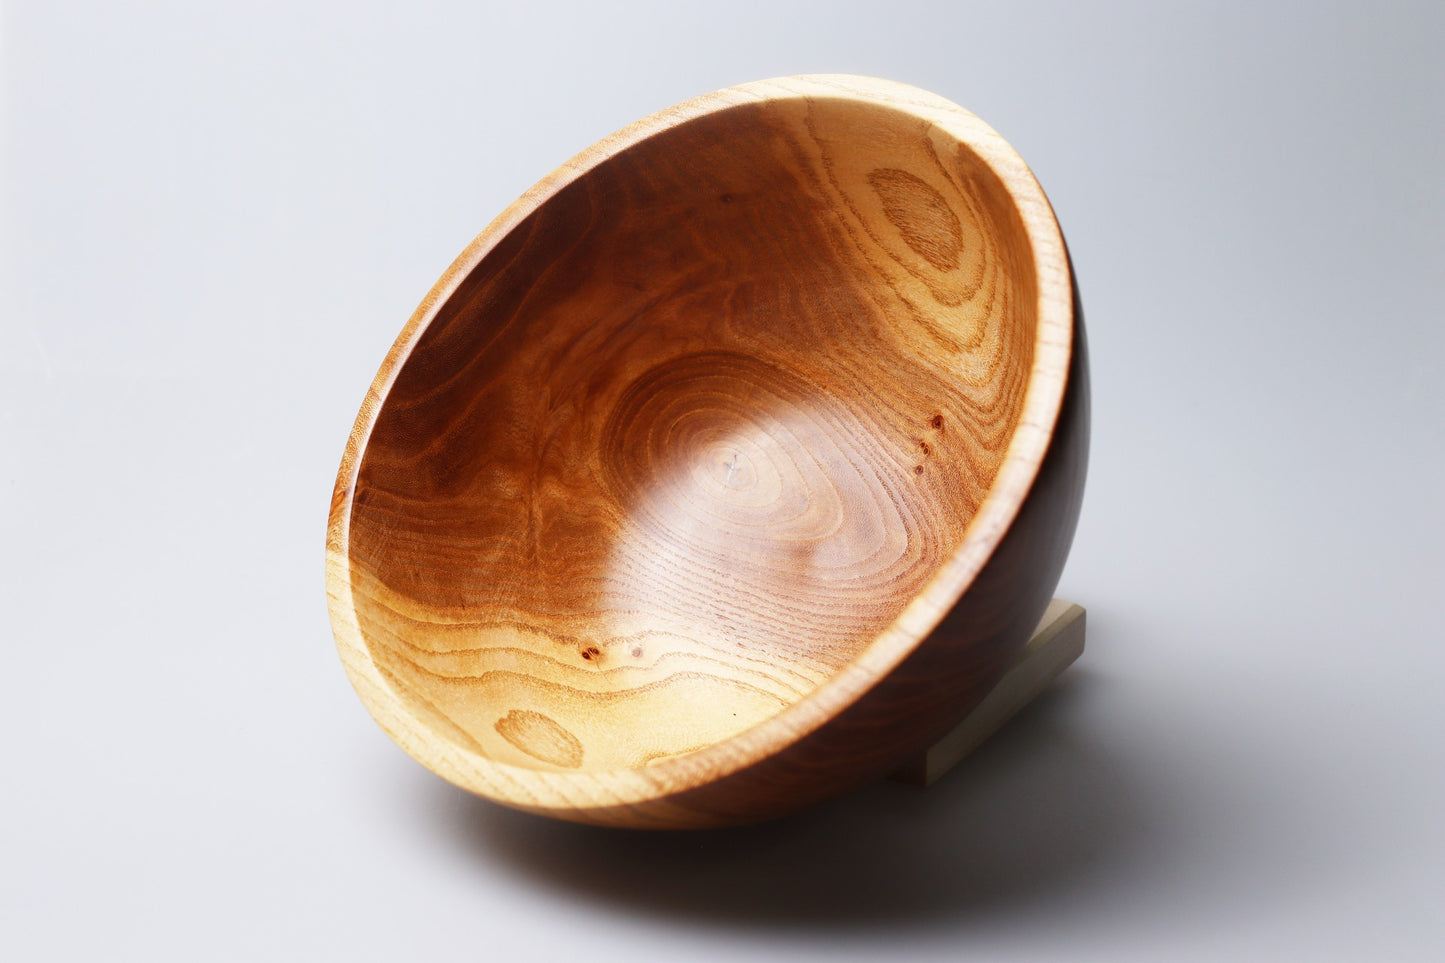 7.75 x 3.5" Mulberry Wood Bowl